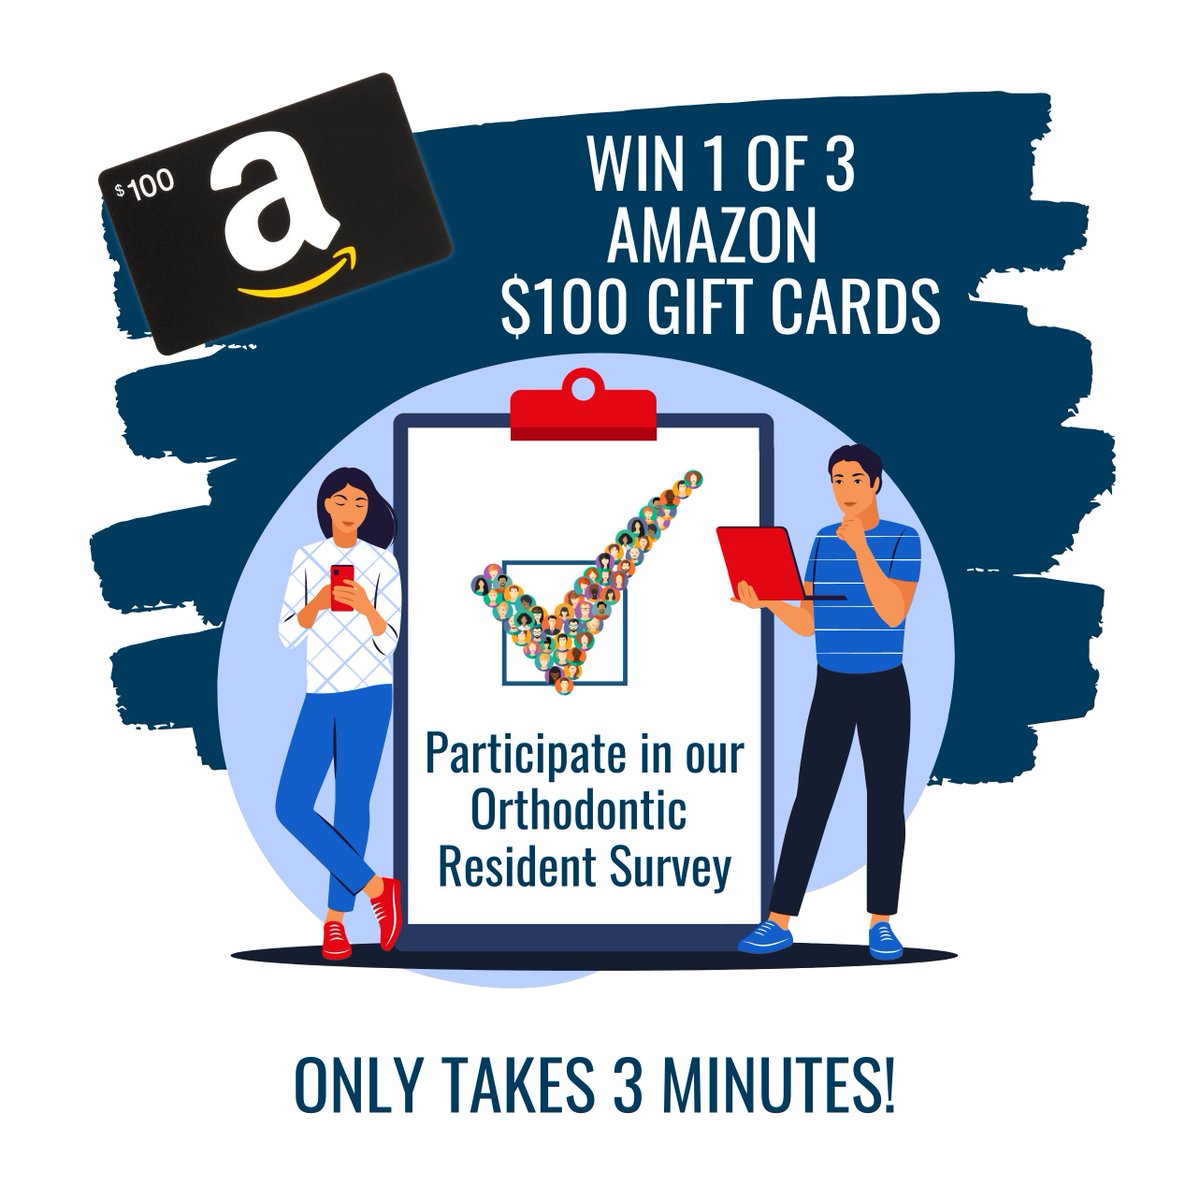 Tell us about your future orthodontic #careerplans and WIN 1 of 3 $100 Amazon gift cards!

Our 3-minute survey asks current #orthodonticresidents, their #futureplans, & their overall orthodontic practice search. 

Take the survey here: surveymonkey.com/r/BCAOrthoResi…